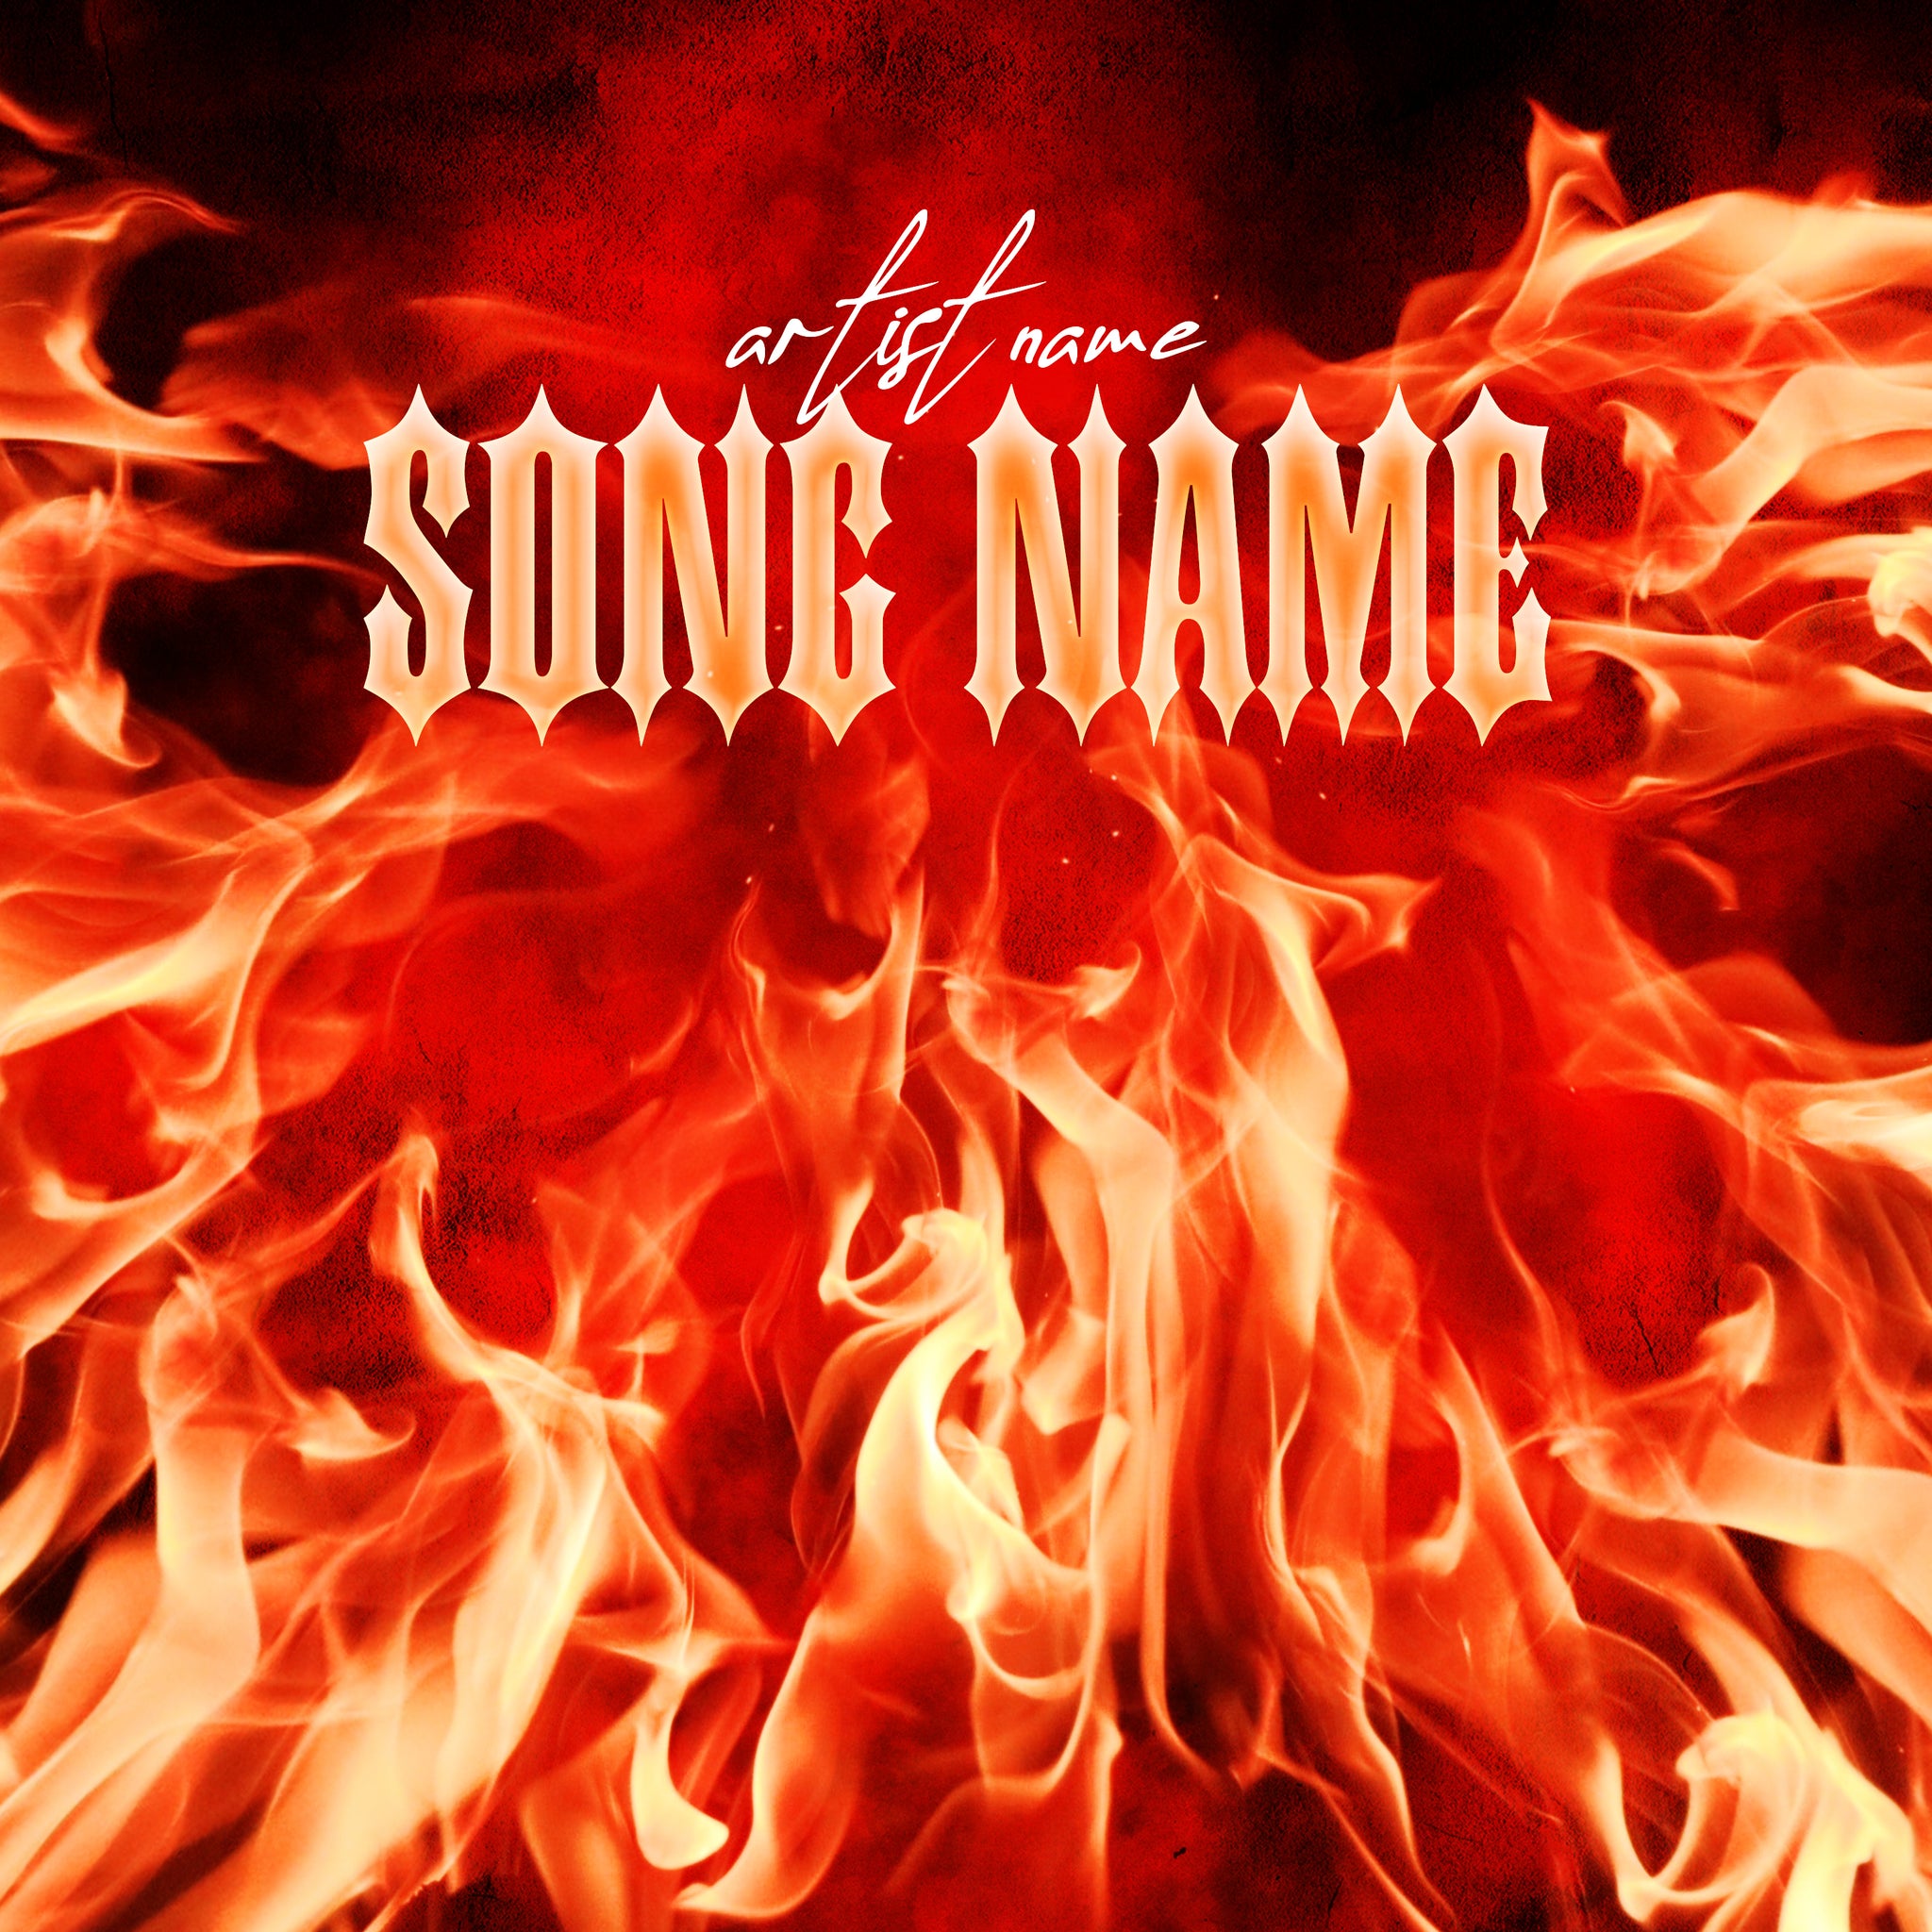 Cover Art On Fire